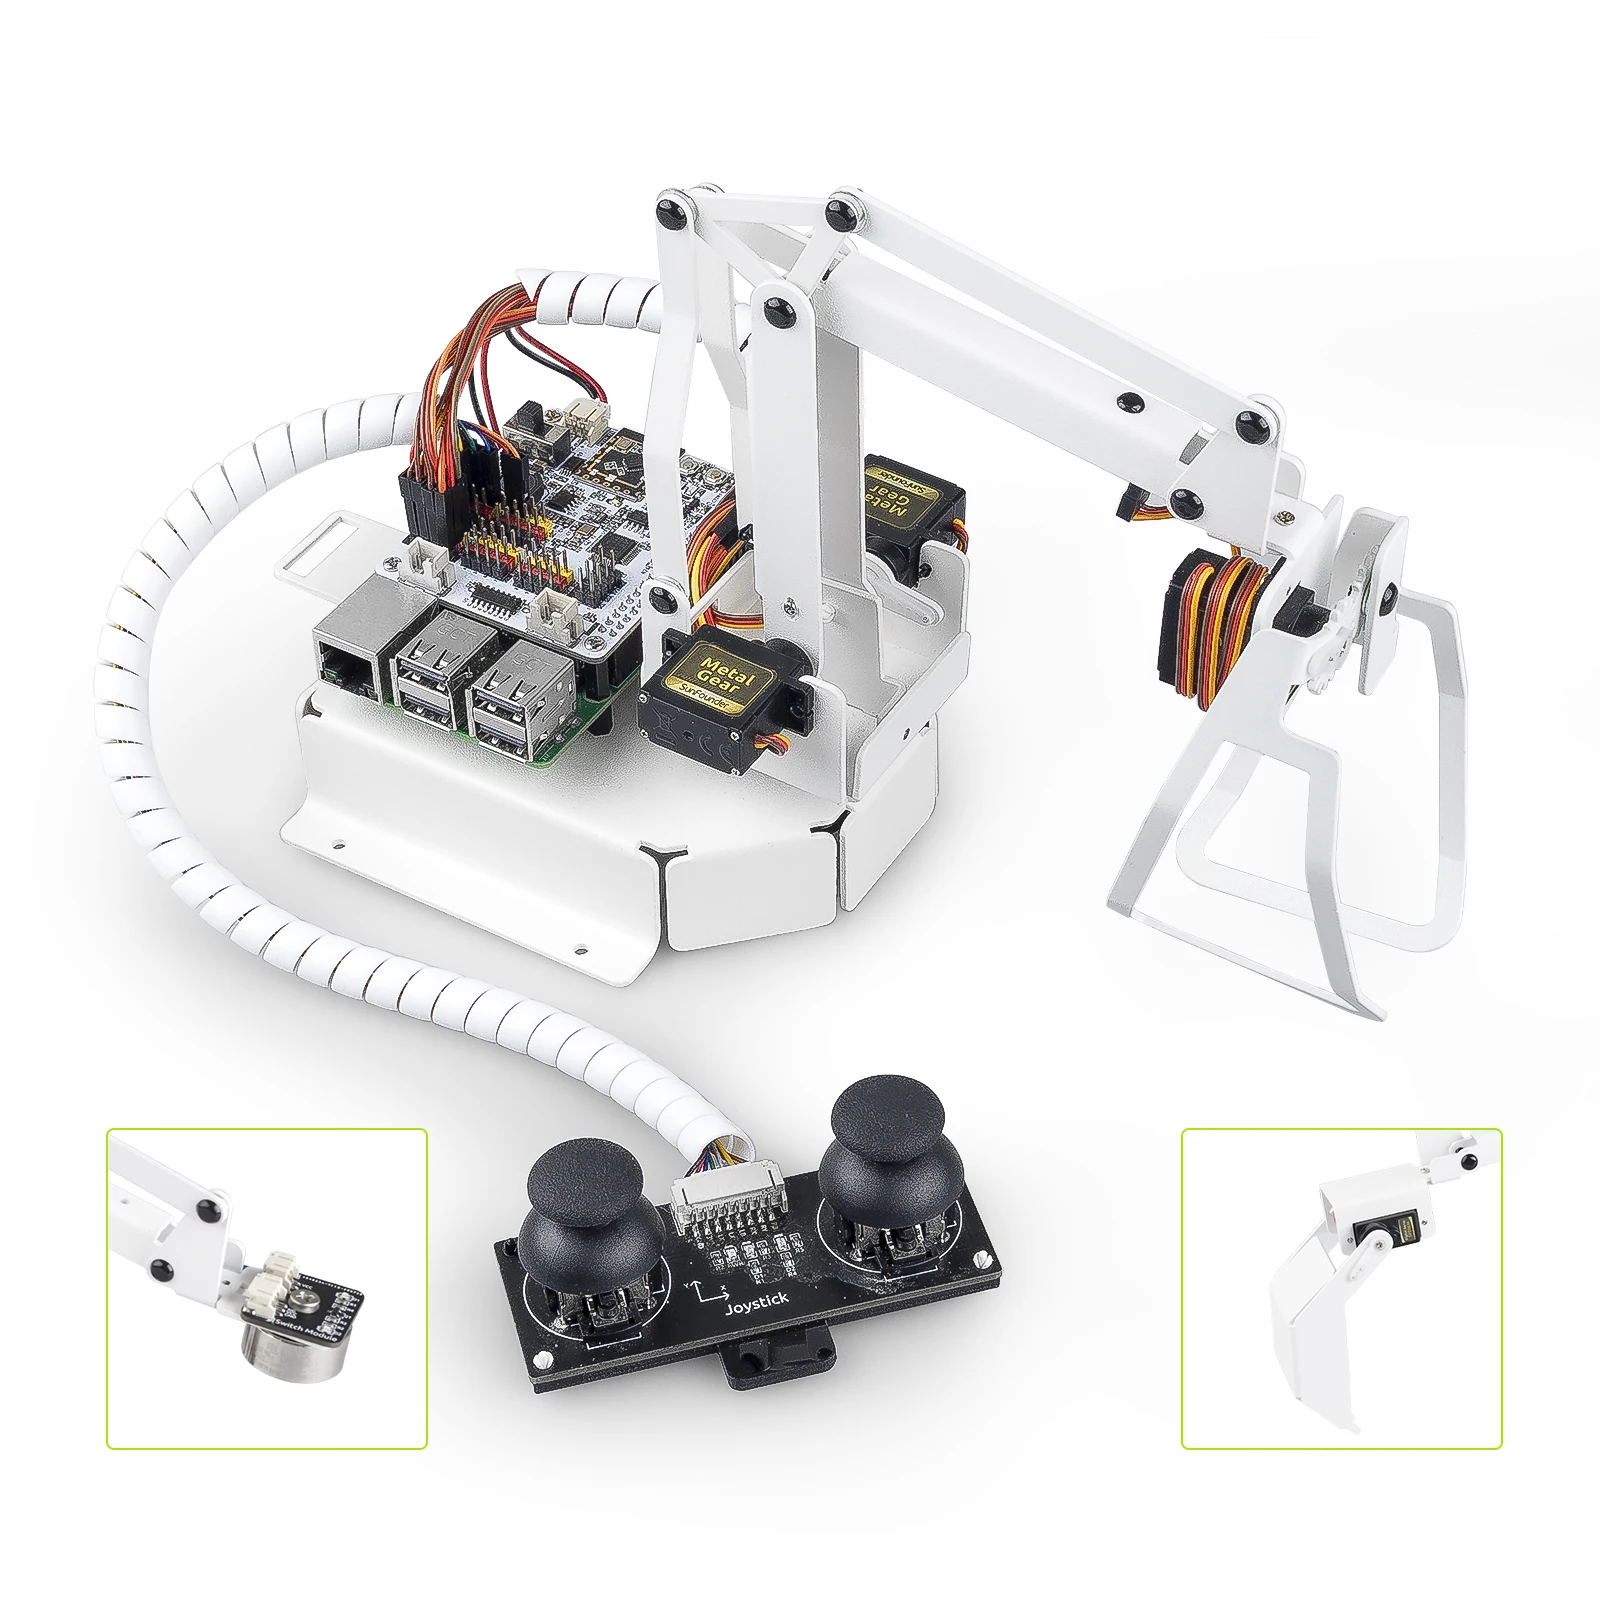 CC SunFounder 4 DOF Robot Arm Kit, Support Graphical Visual Programming, Python, for Raspberry Pi 4B 3B+ 3B sunfounder remote control robot kit for raspberry pi smart video car kit v2 0 rc robot app controlled toys rpi not included